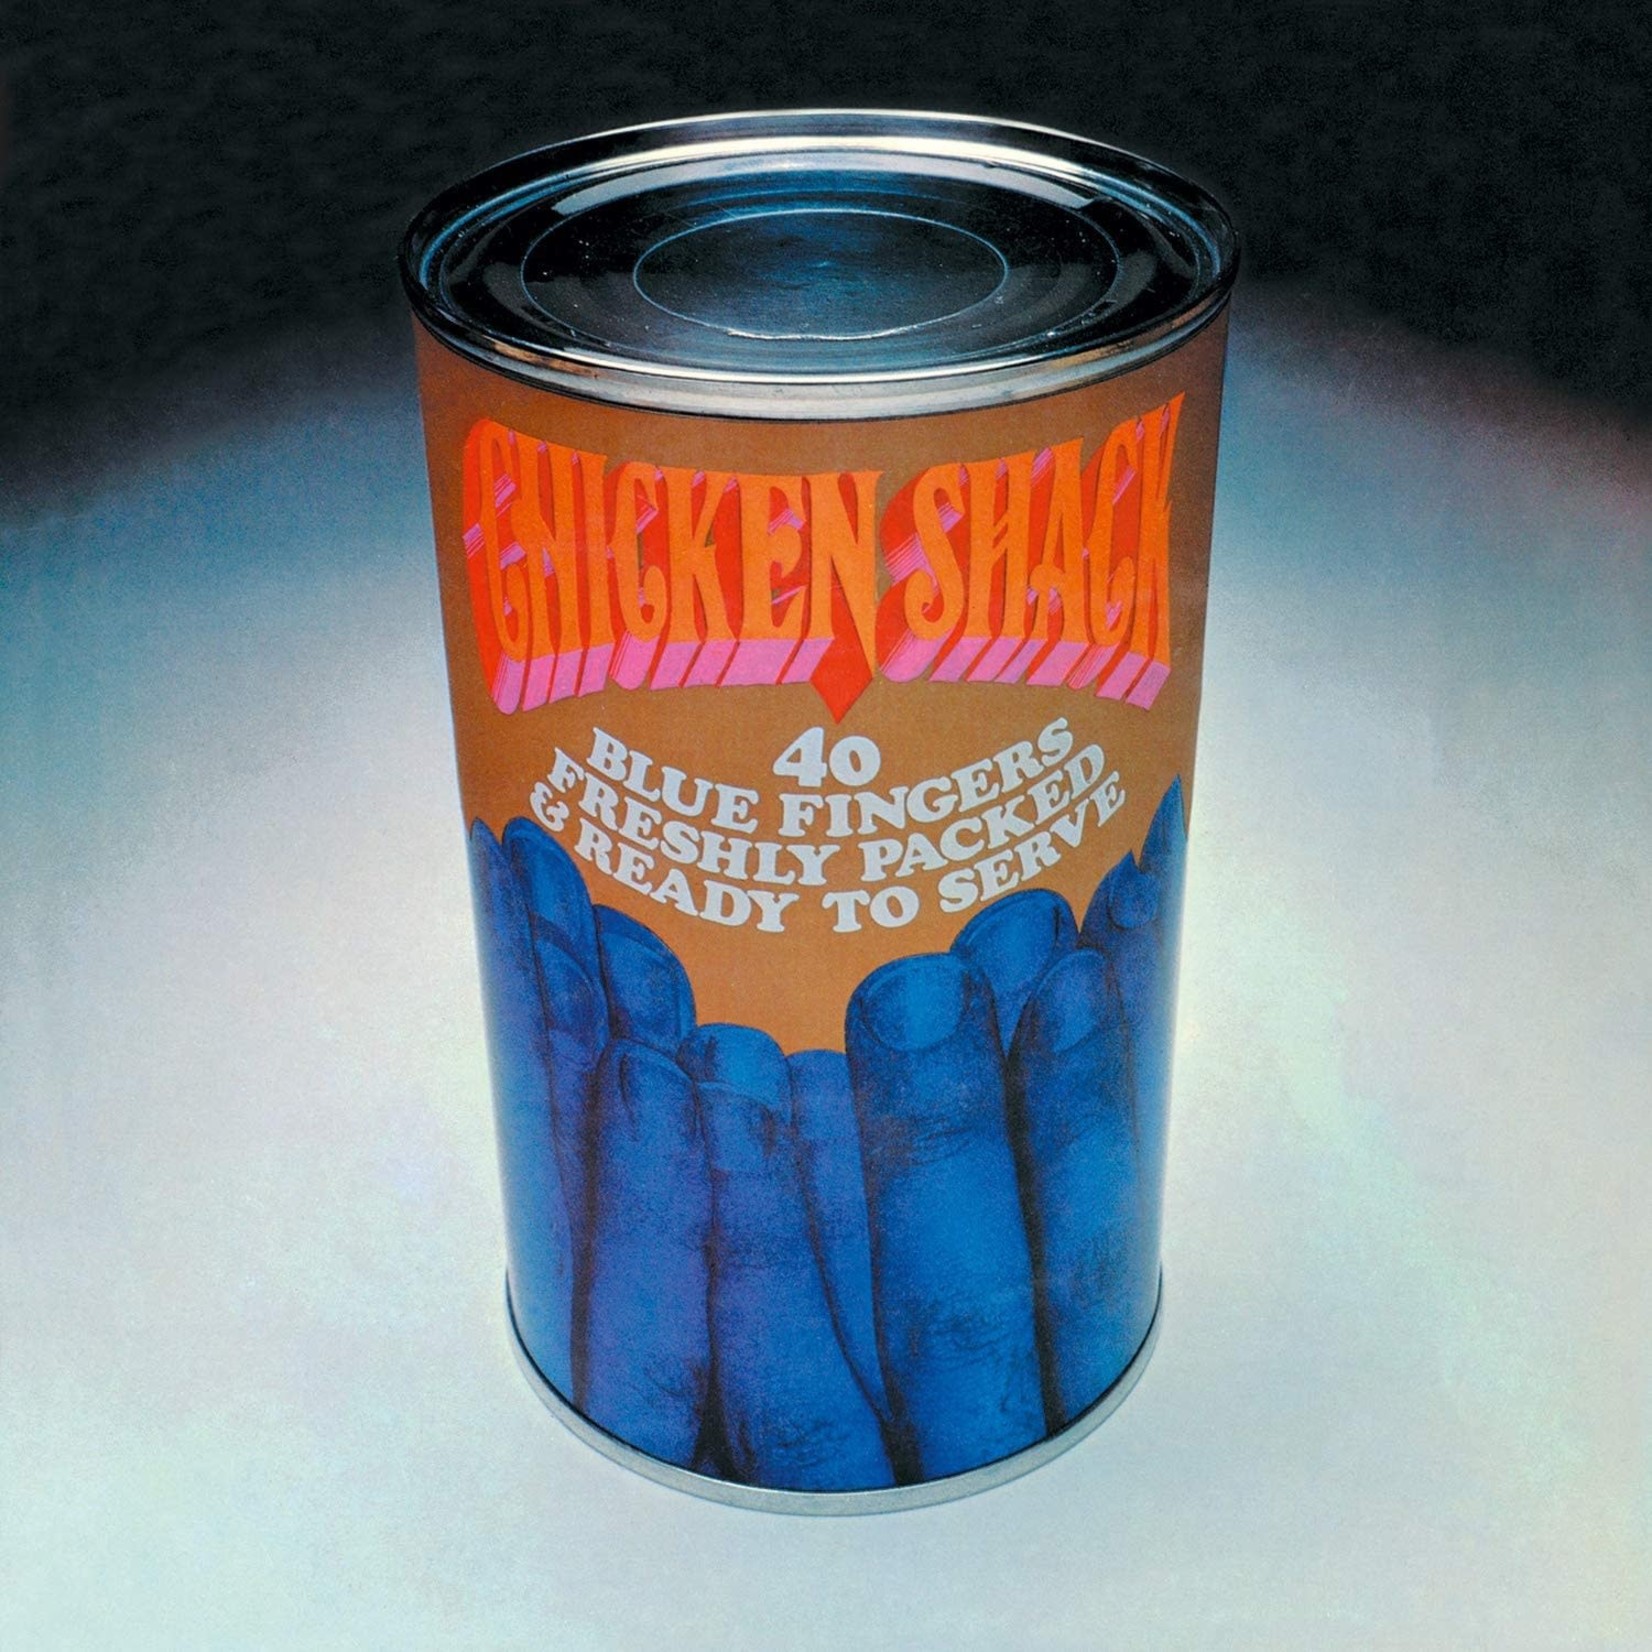 CHICKEN SHACK 40 BLUE FINGERS FRESHLY PACKED AND READY TO SERVE/COLOURED VINYL ANNVERSARY EDITION